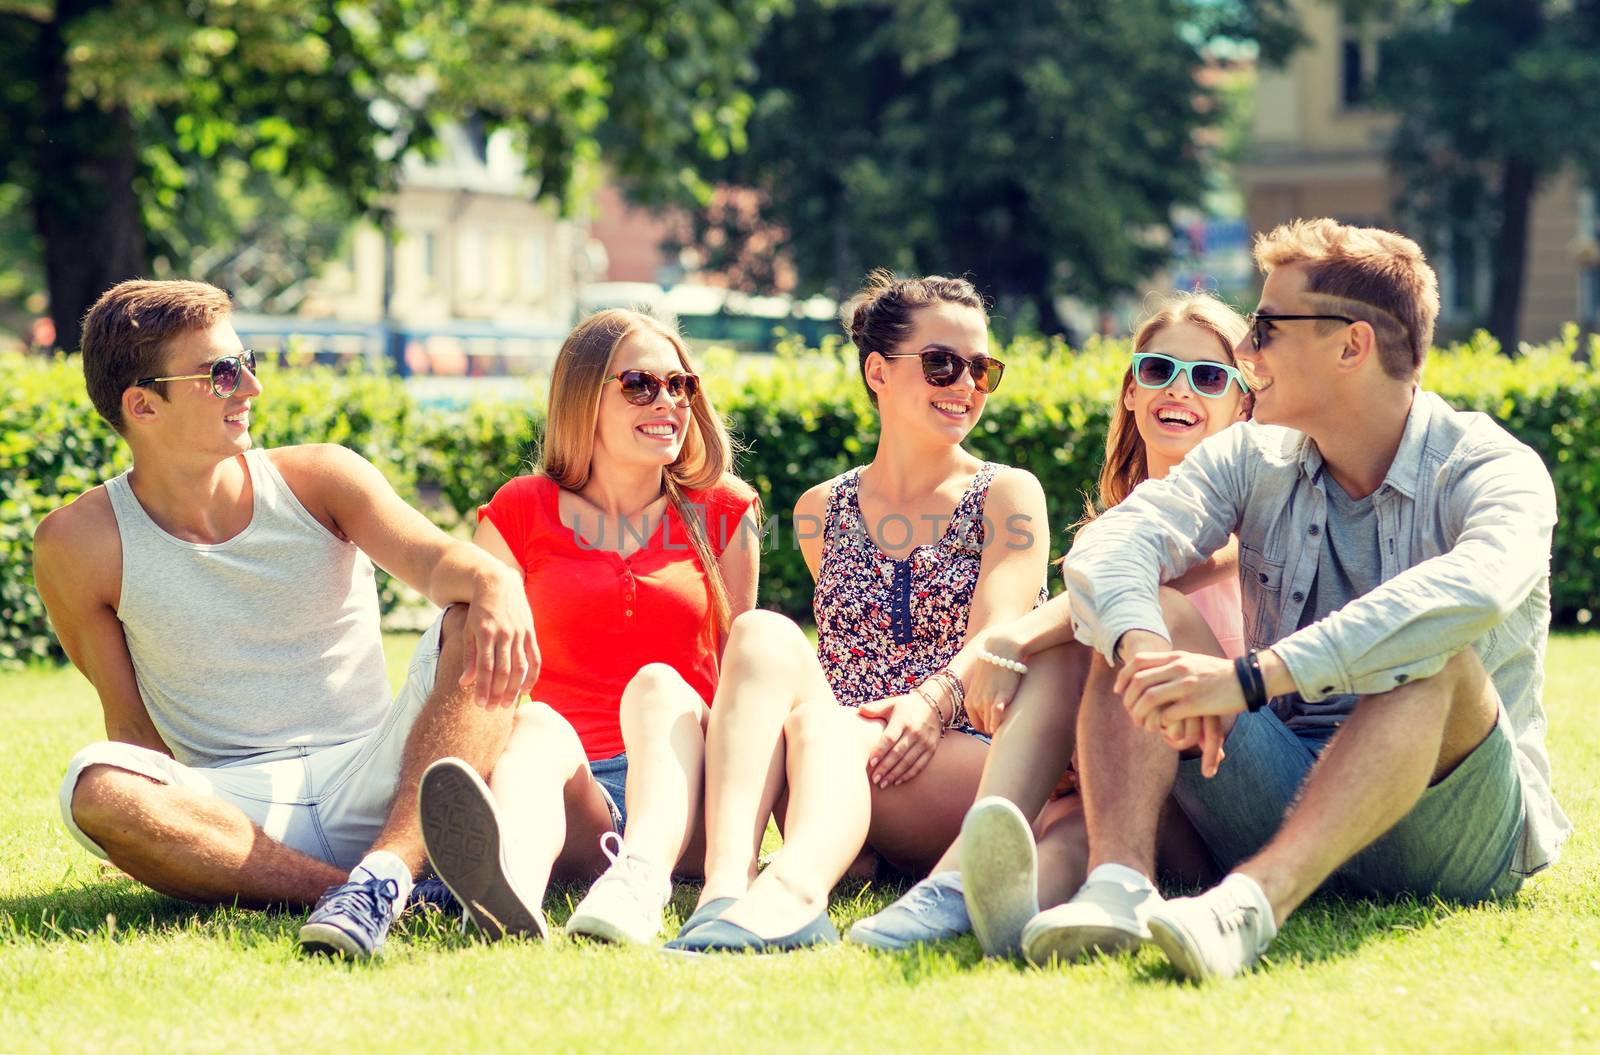 group of smiling friends outdoors sitting on grass by dolgachov